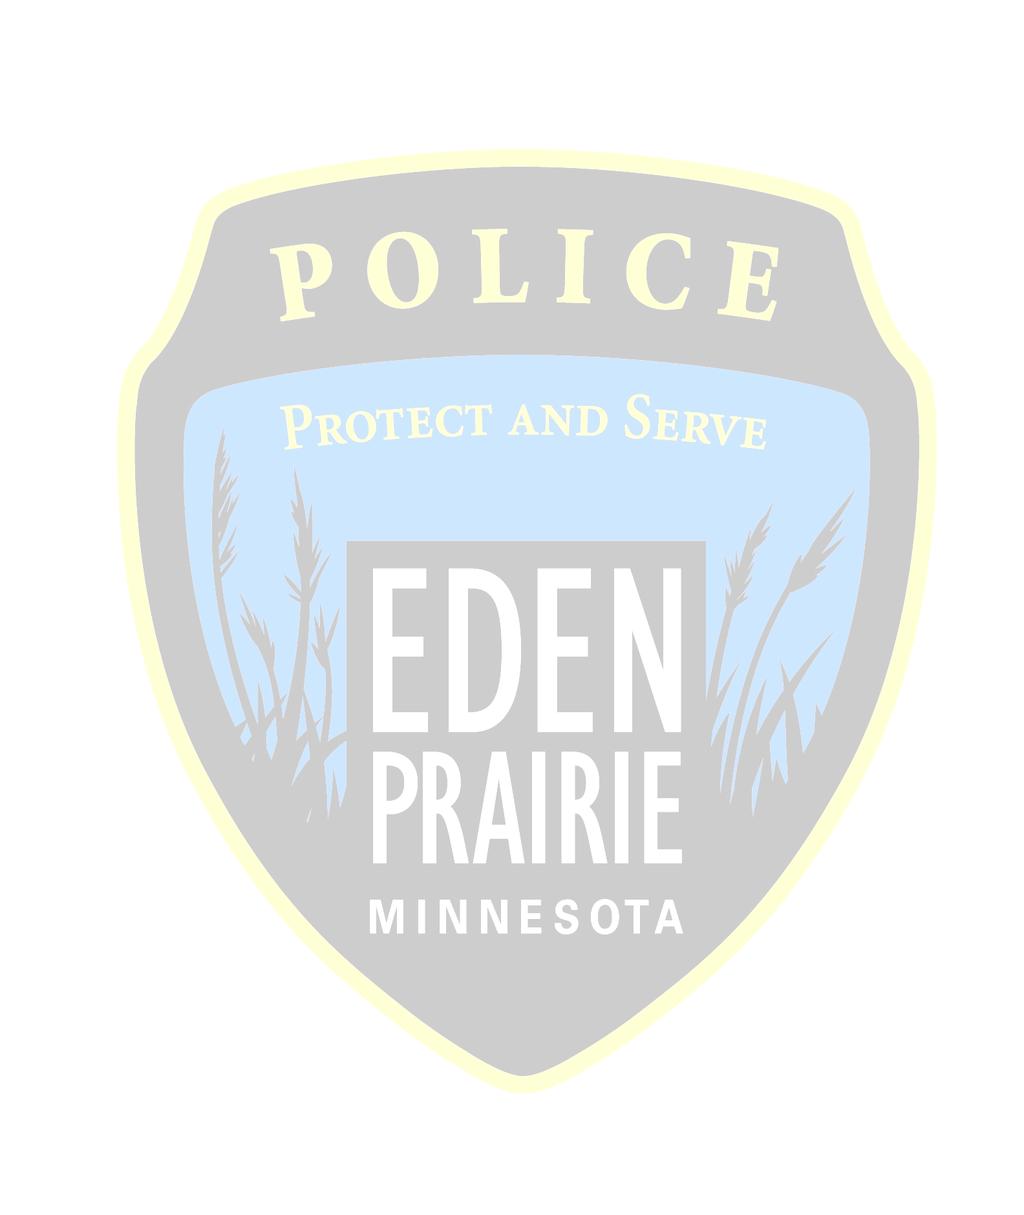 Mission statement The mission of the Eden Prairie Police Department is to protect and serve the community of Eden Prairie through active and professional engagement.